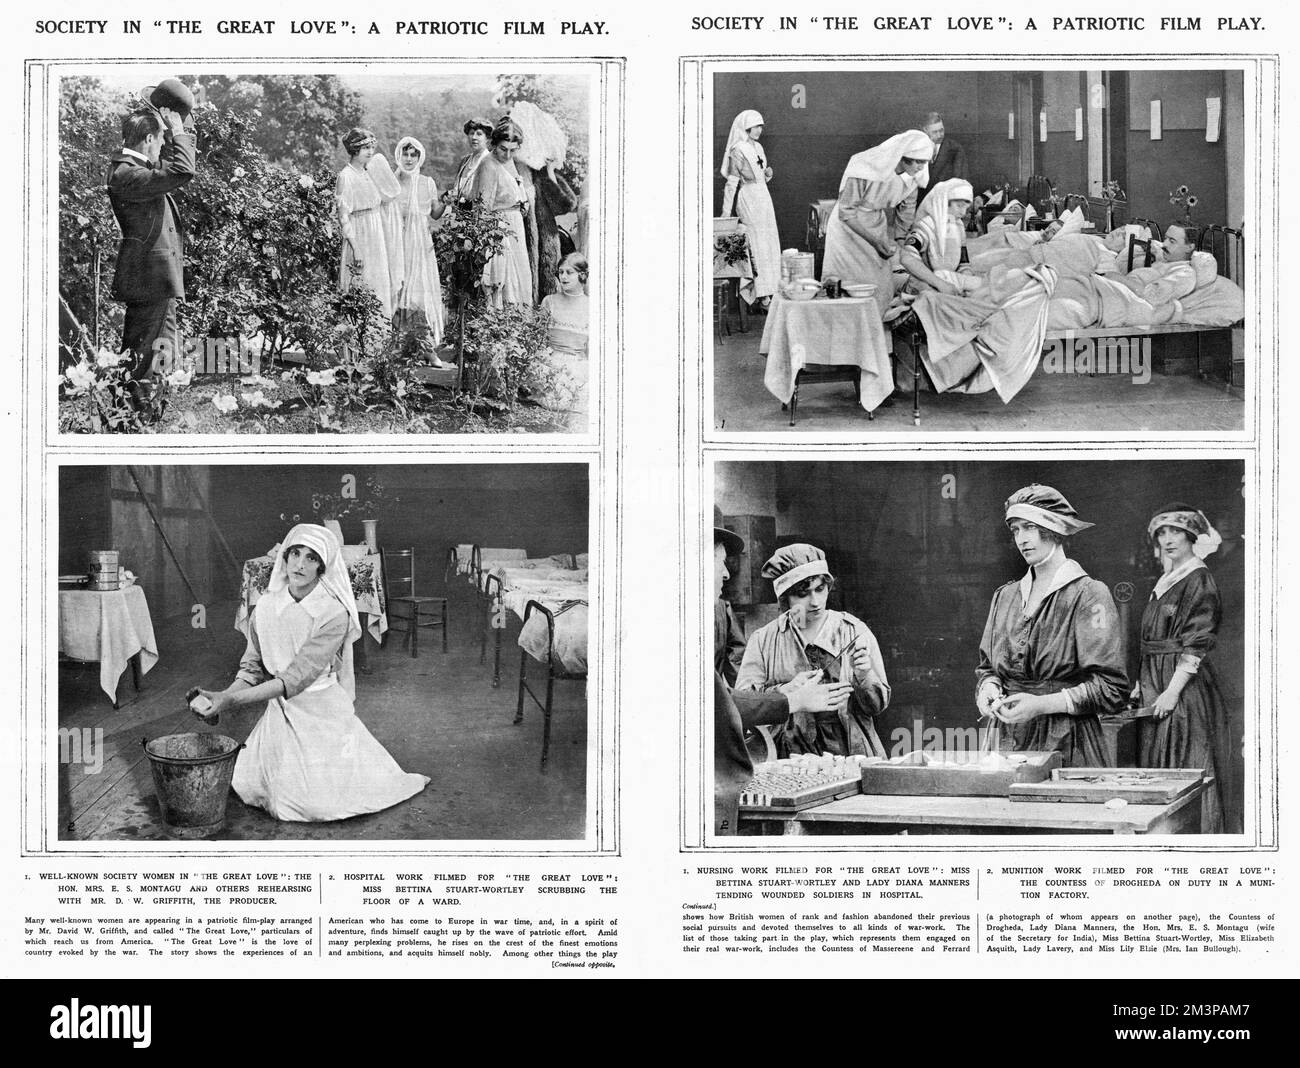 A double page spread from The Sketch magazine showing four scenes from the patriotic war film, The Great Love.  Directed by D. W. Griffith and released in 1918, the leading roles were played by Lilian Gish and Robert Harron but there was a supporting cast of society ladies, who through the film demonstrated how British women of rank and fashion had abandoned their previous social pursuits and devoted themselves to all kinds of war-work.  They included some of the most prominent and well-known figures in society - Bettine (Bettina) Stuart-Wortley, the ubiquitous Lady Diana Manners, Hazel, Lady Stock Photo